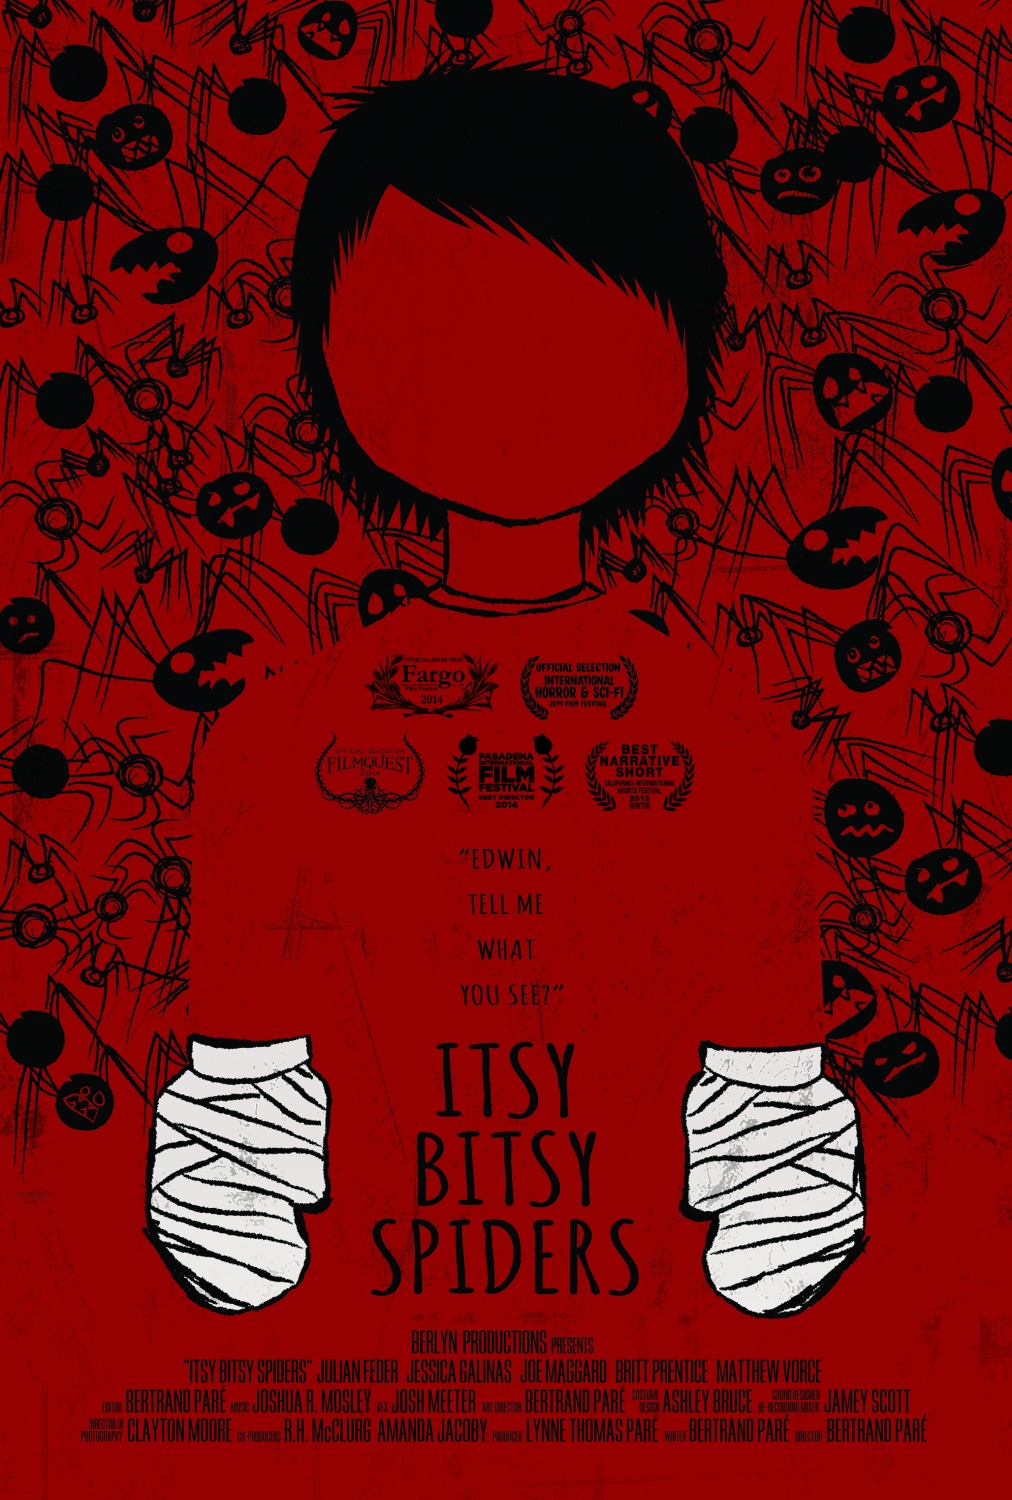 Extra Large Movie Poster Image for Itsy Bitsy Spiders